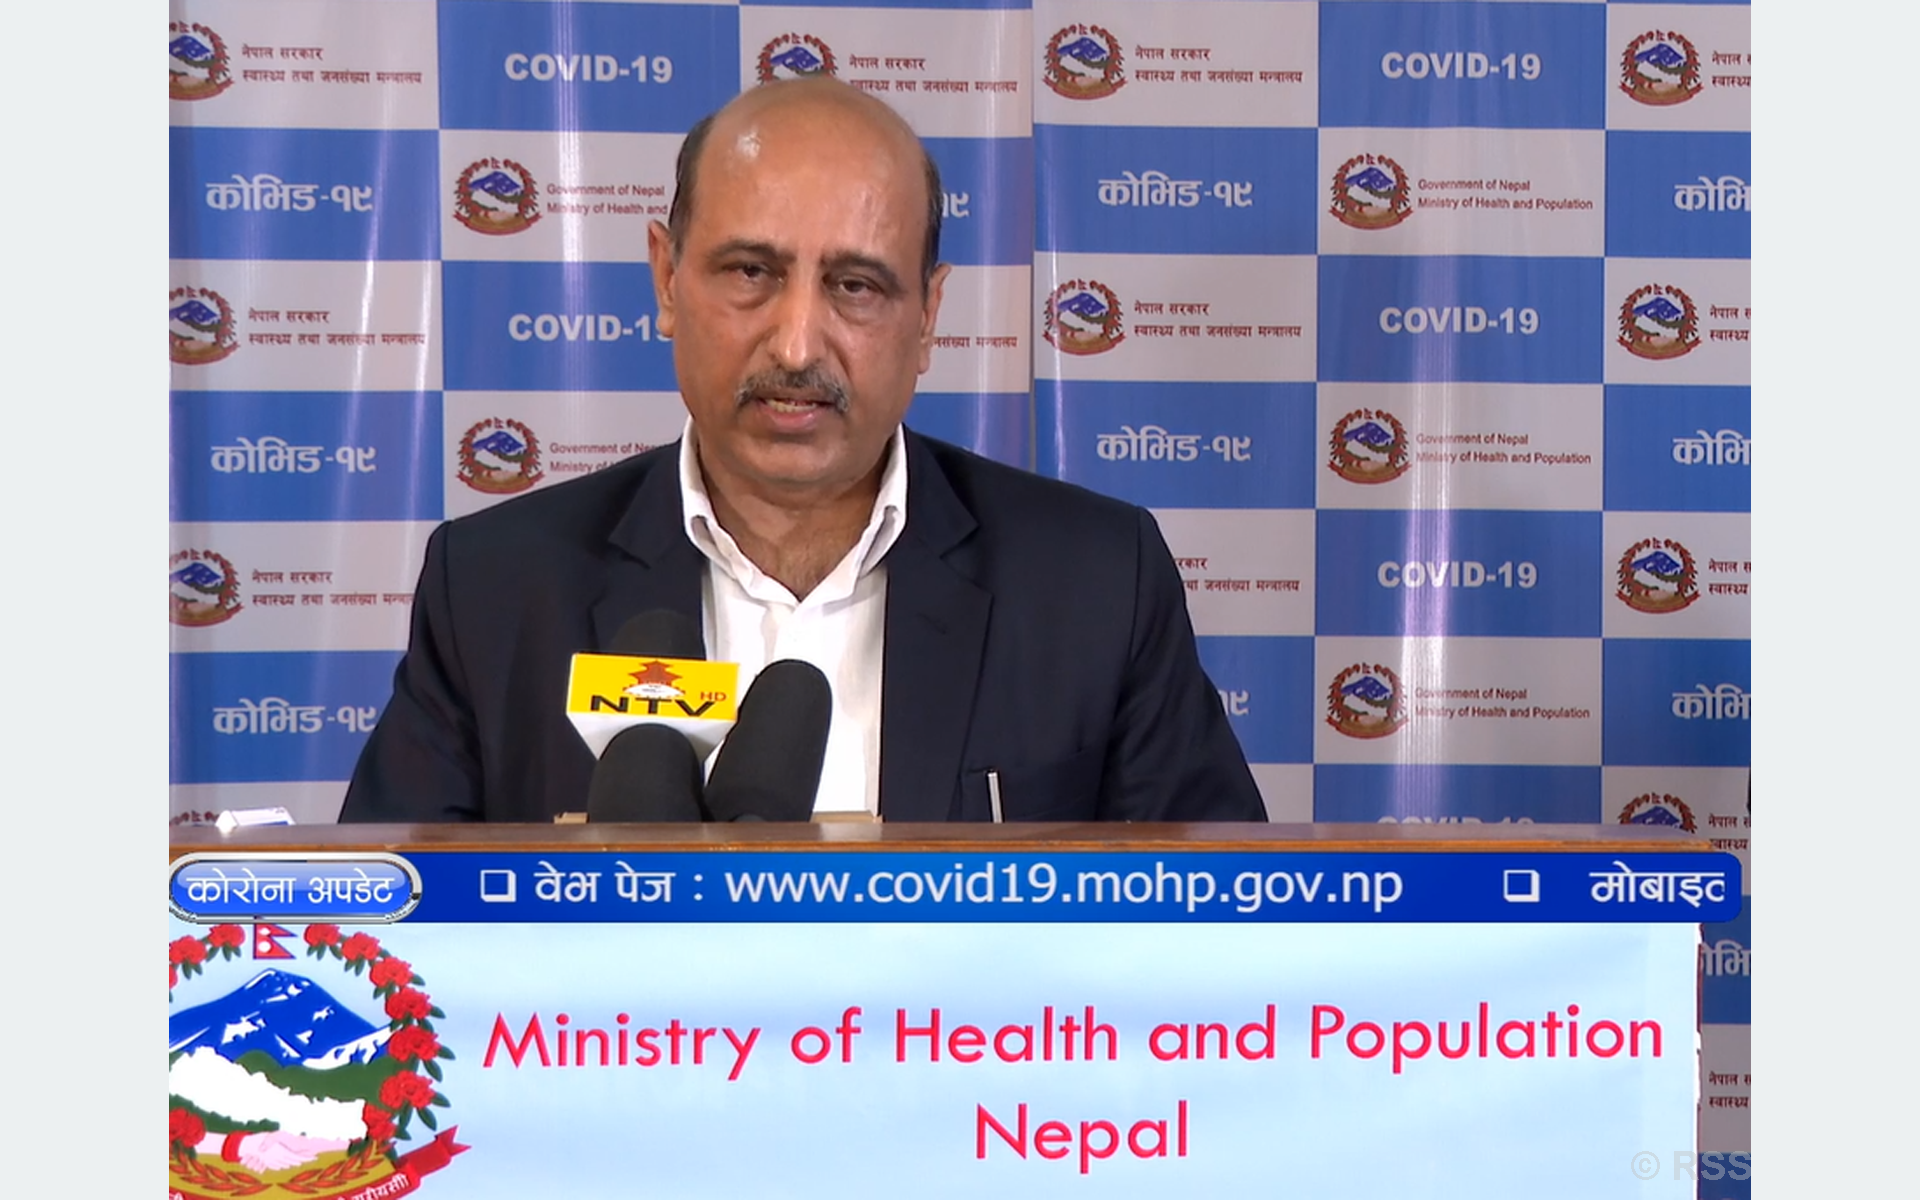 MoHP Spokesperson transferred to Unified COVID-19 Hospital